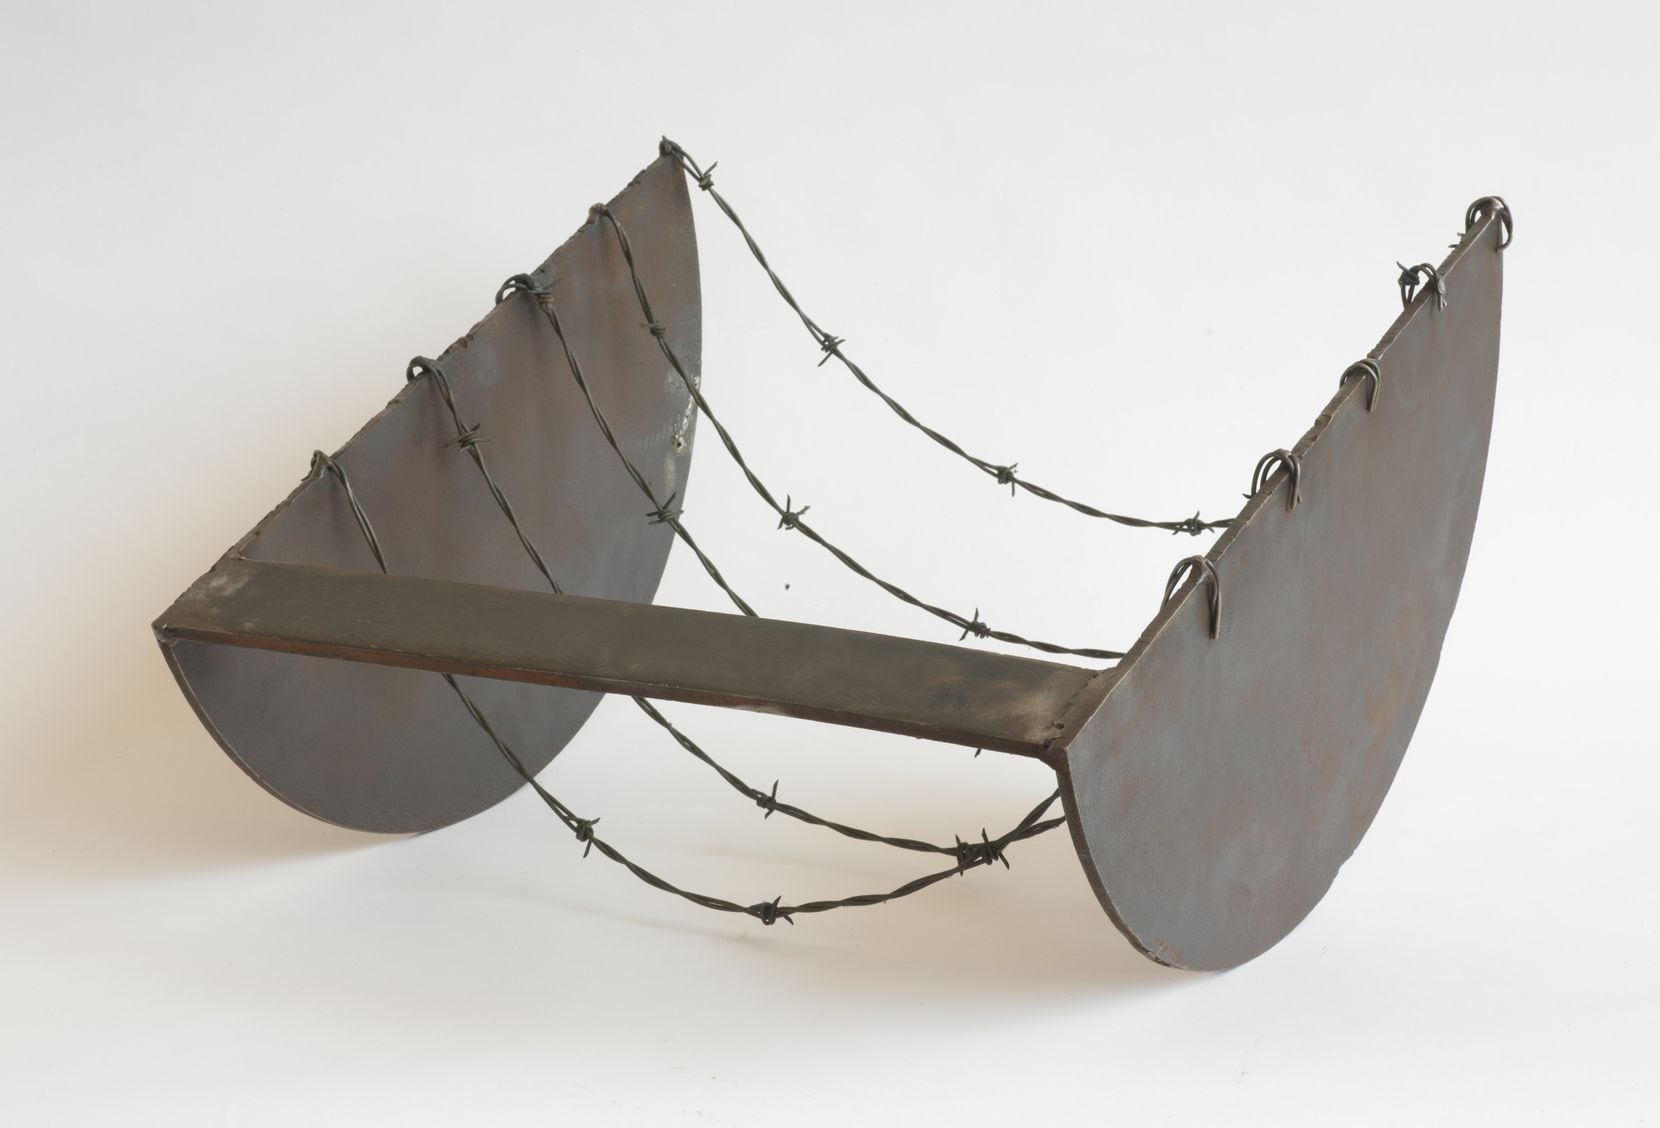 Melvin Edwards' 1973 sculpture "Five to the Bar" is part of the "Nasher Mixtape" exhibition,...